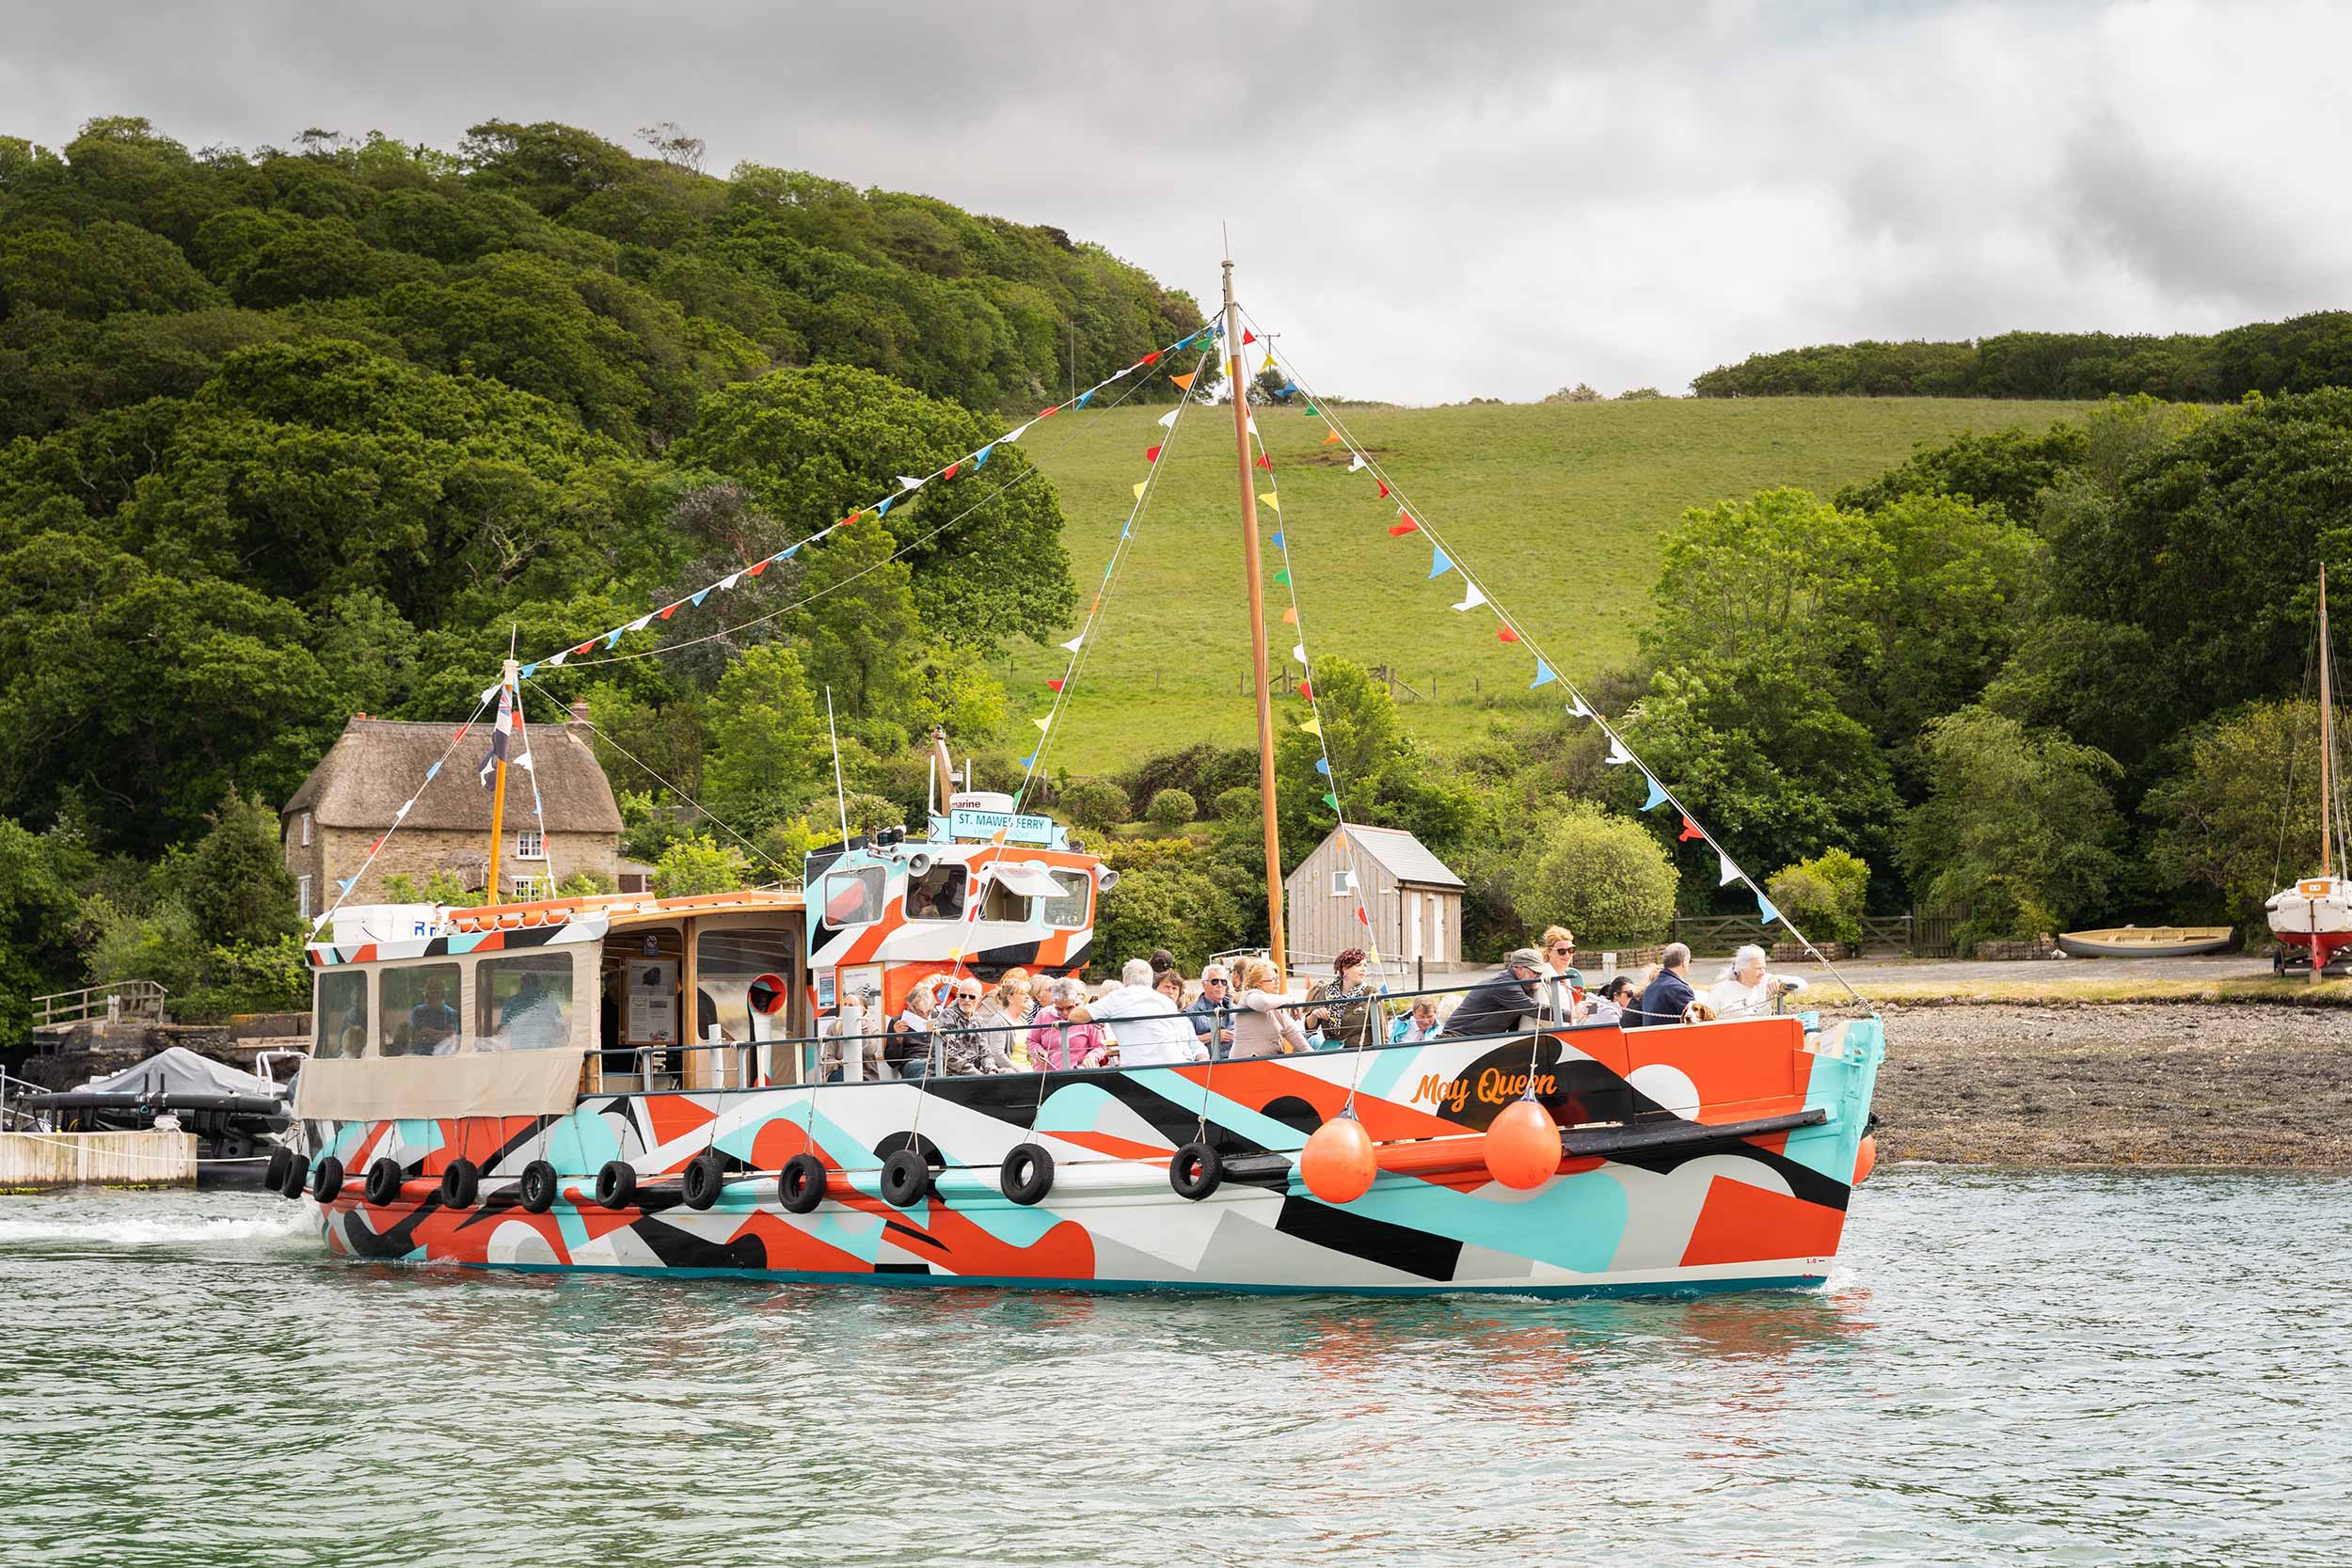 The ferry 'May Queen' carries passengers along the Fal River, decorated in its orange, white and light blue dazzle livery.